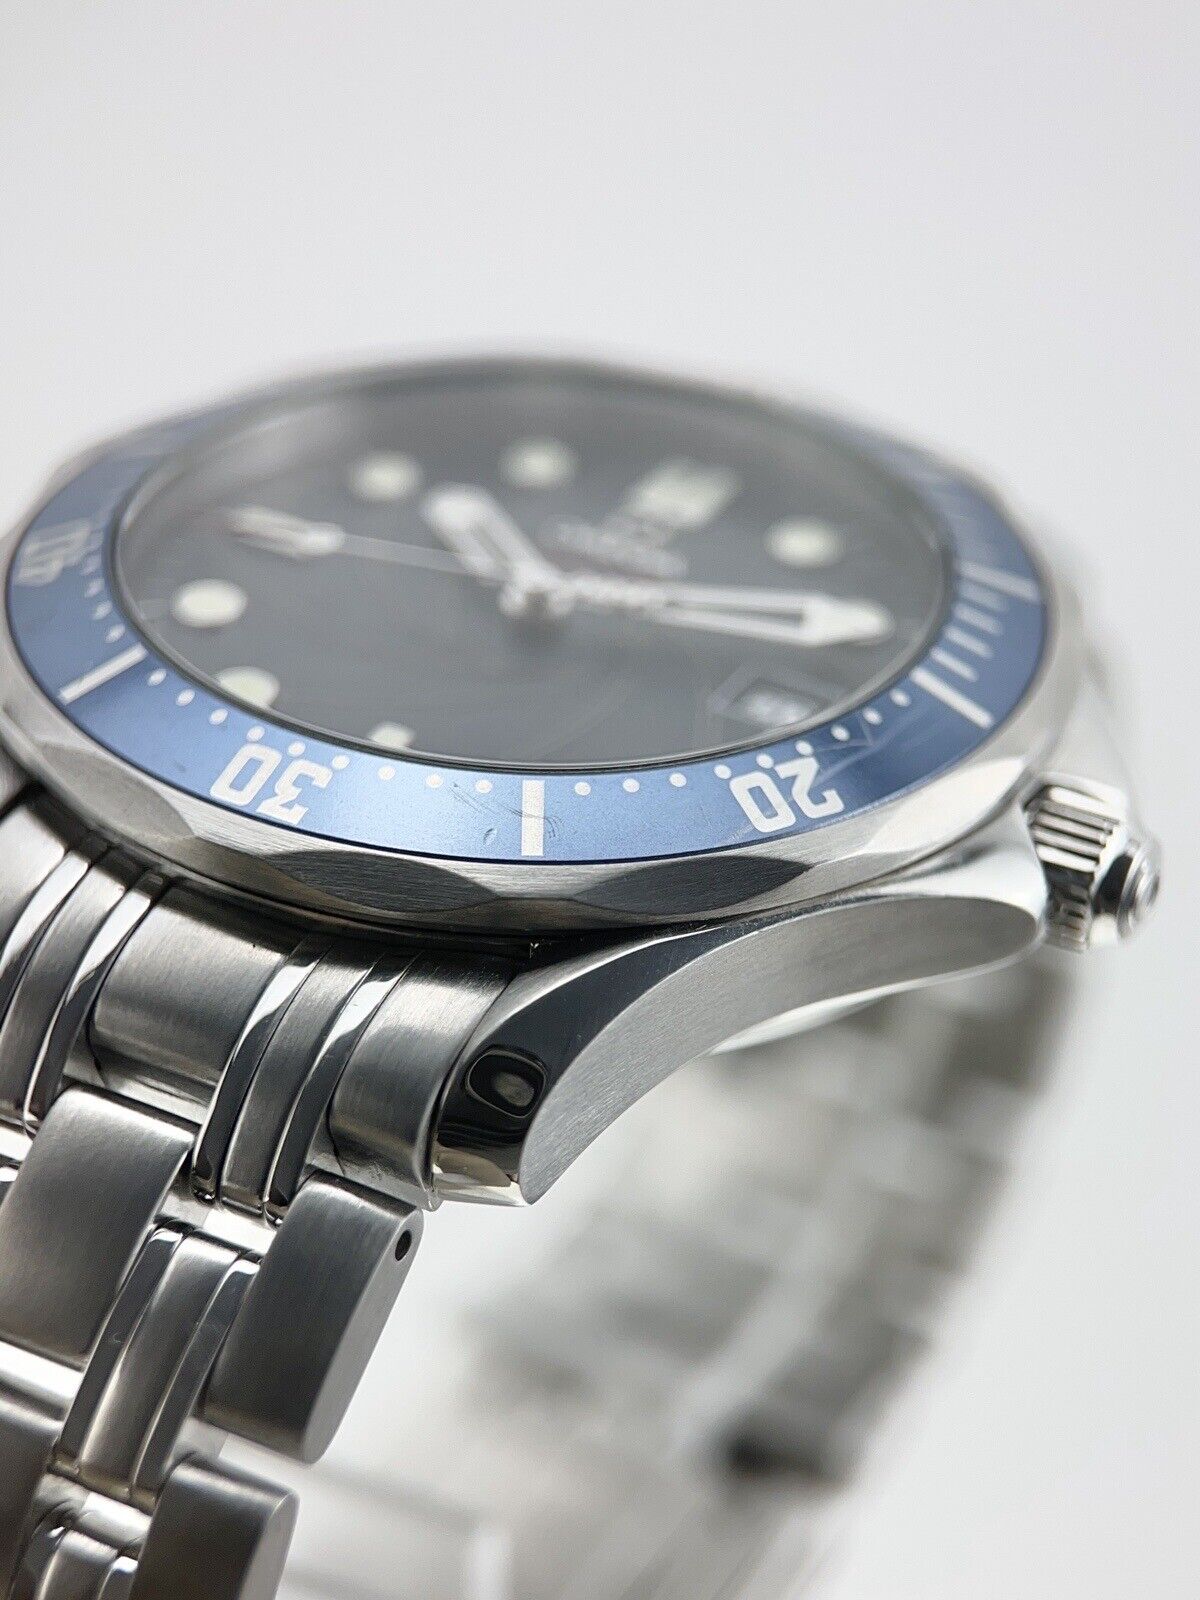 Omega Seamaster James Bond Stainless Steel Blue 41mm Automatic Men’s Watch